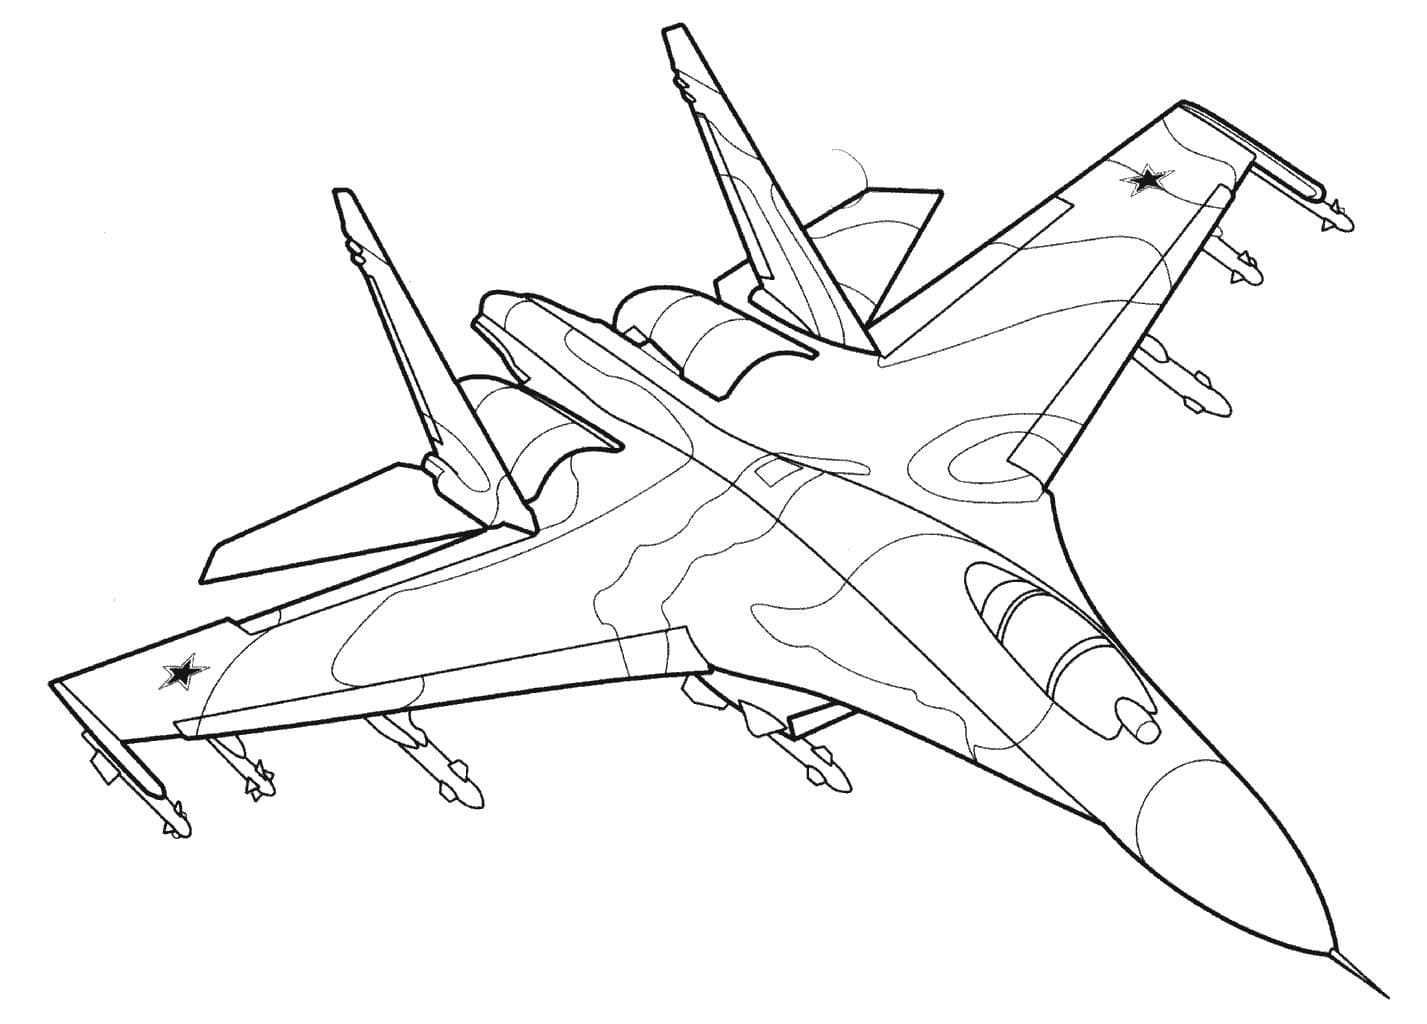 free vintage airplane coloring pages